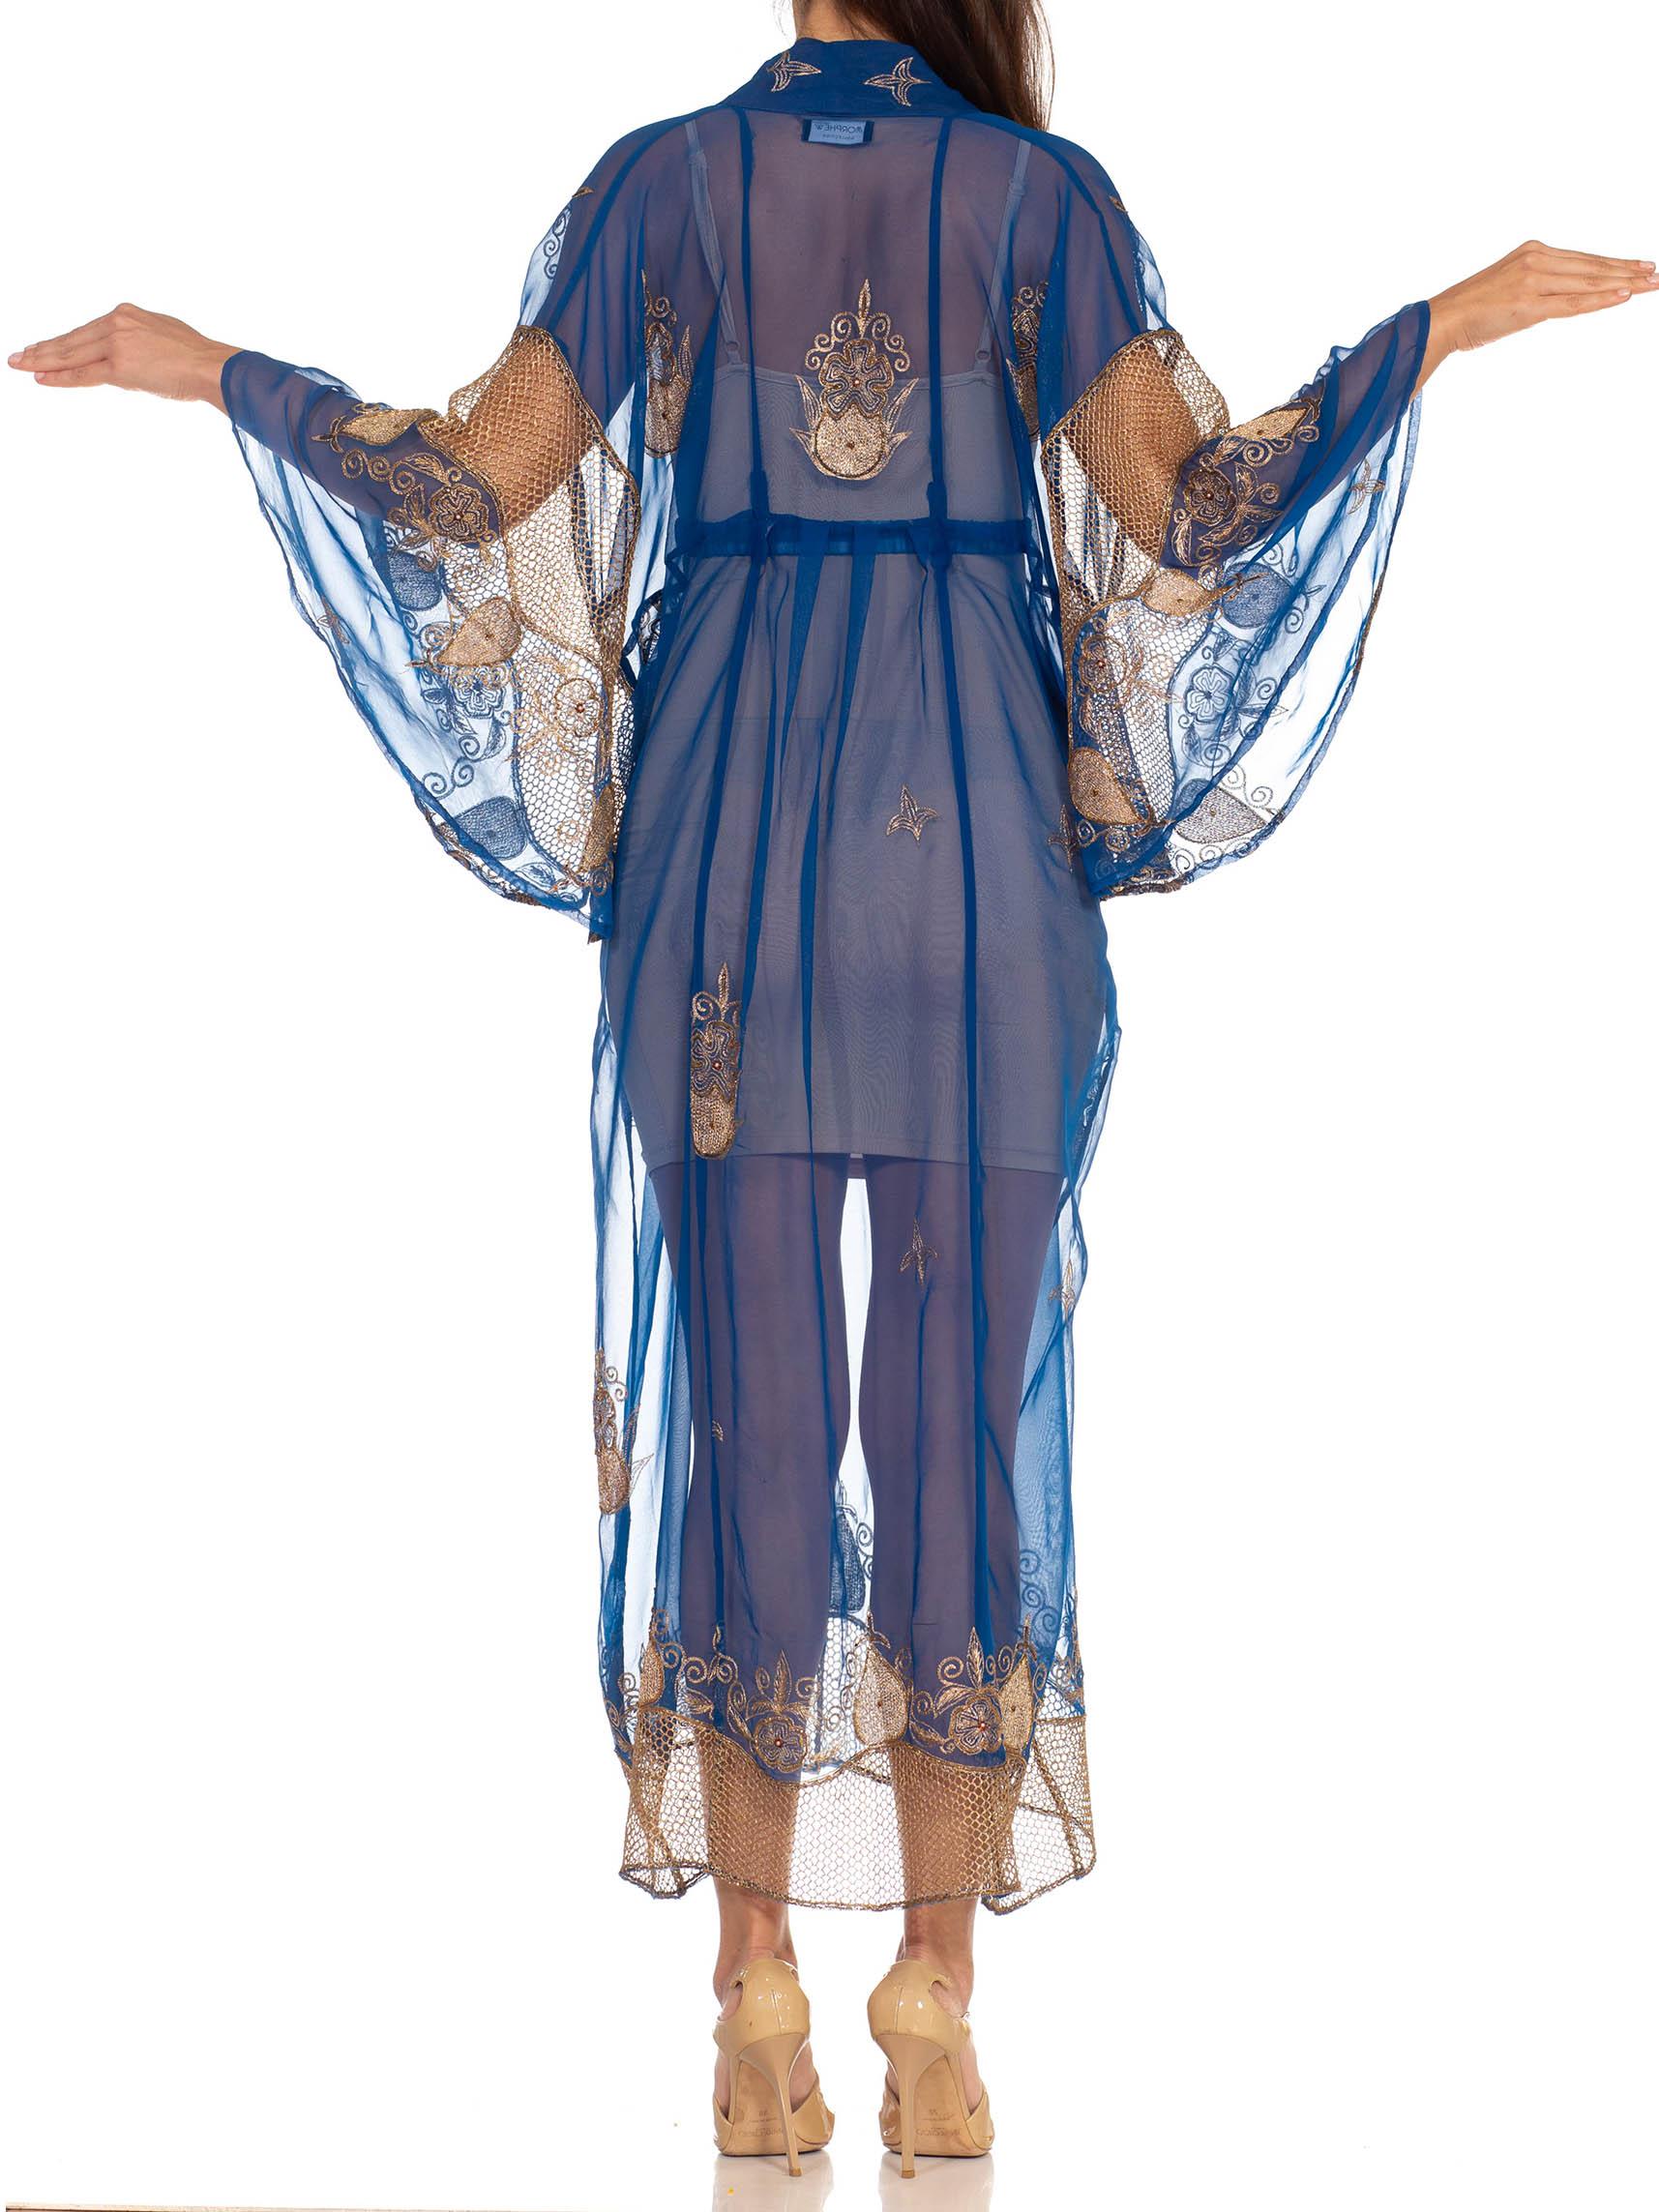 Morphew Collection Blue & Gold Silk Kaftan Made From Vintage Saris In Excellent Condition For Sale In New York, NY